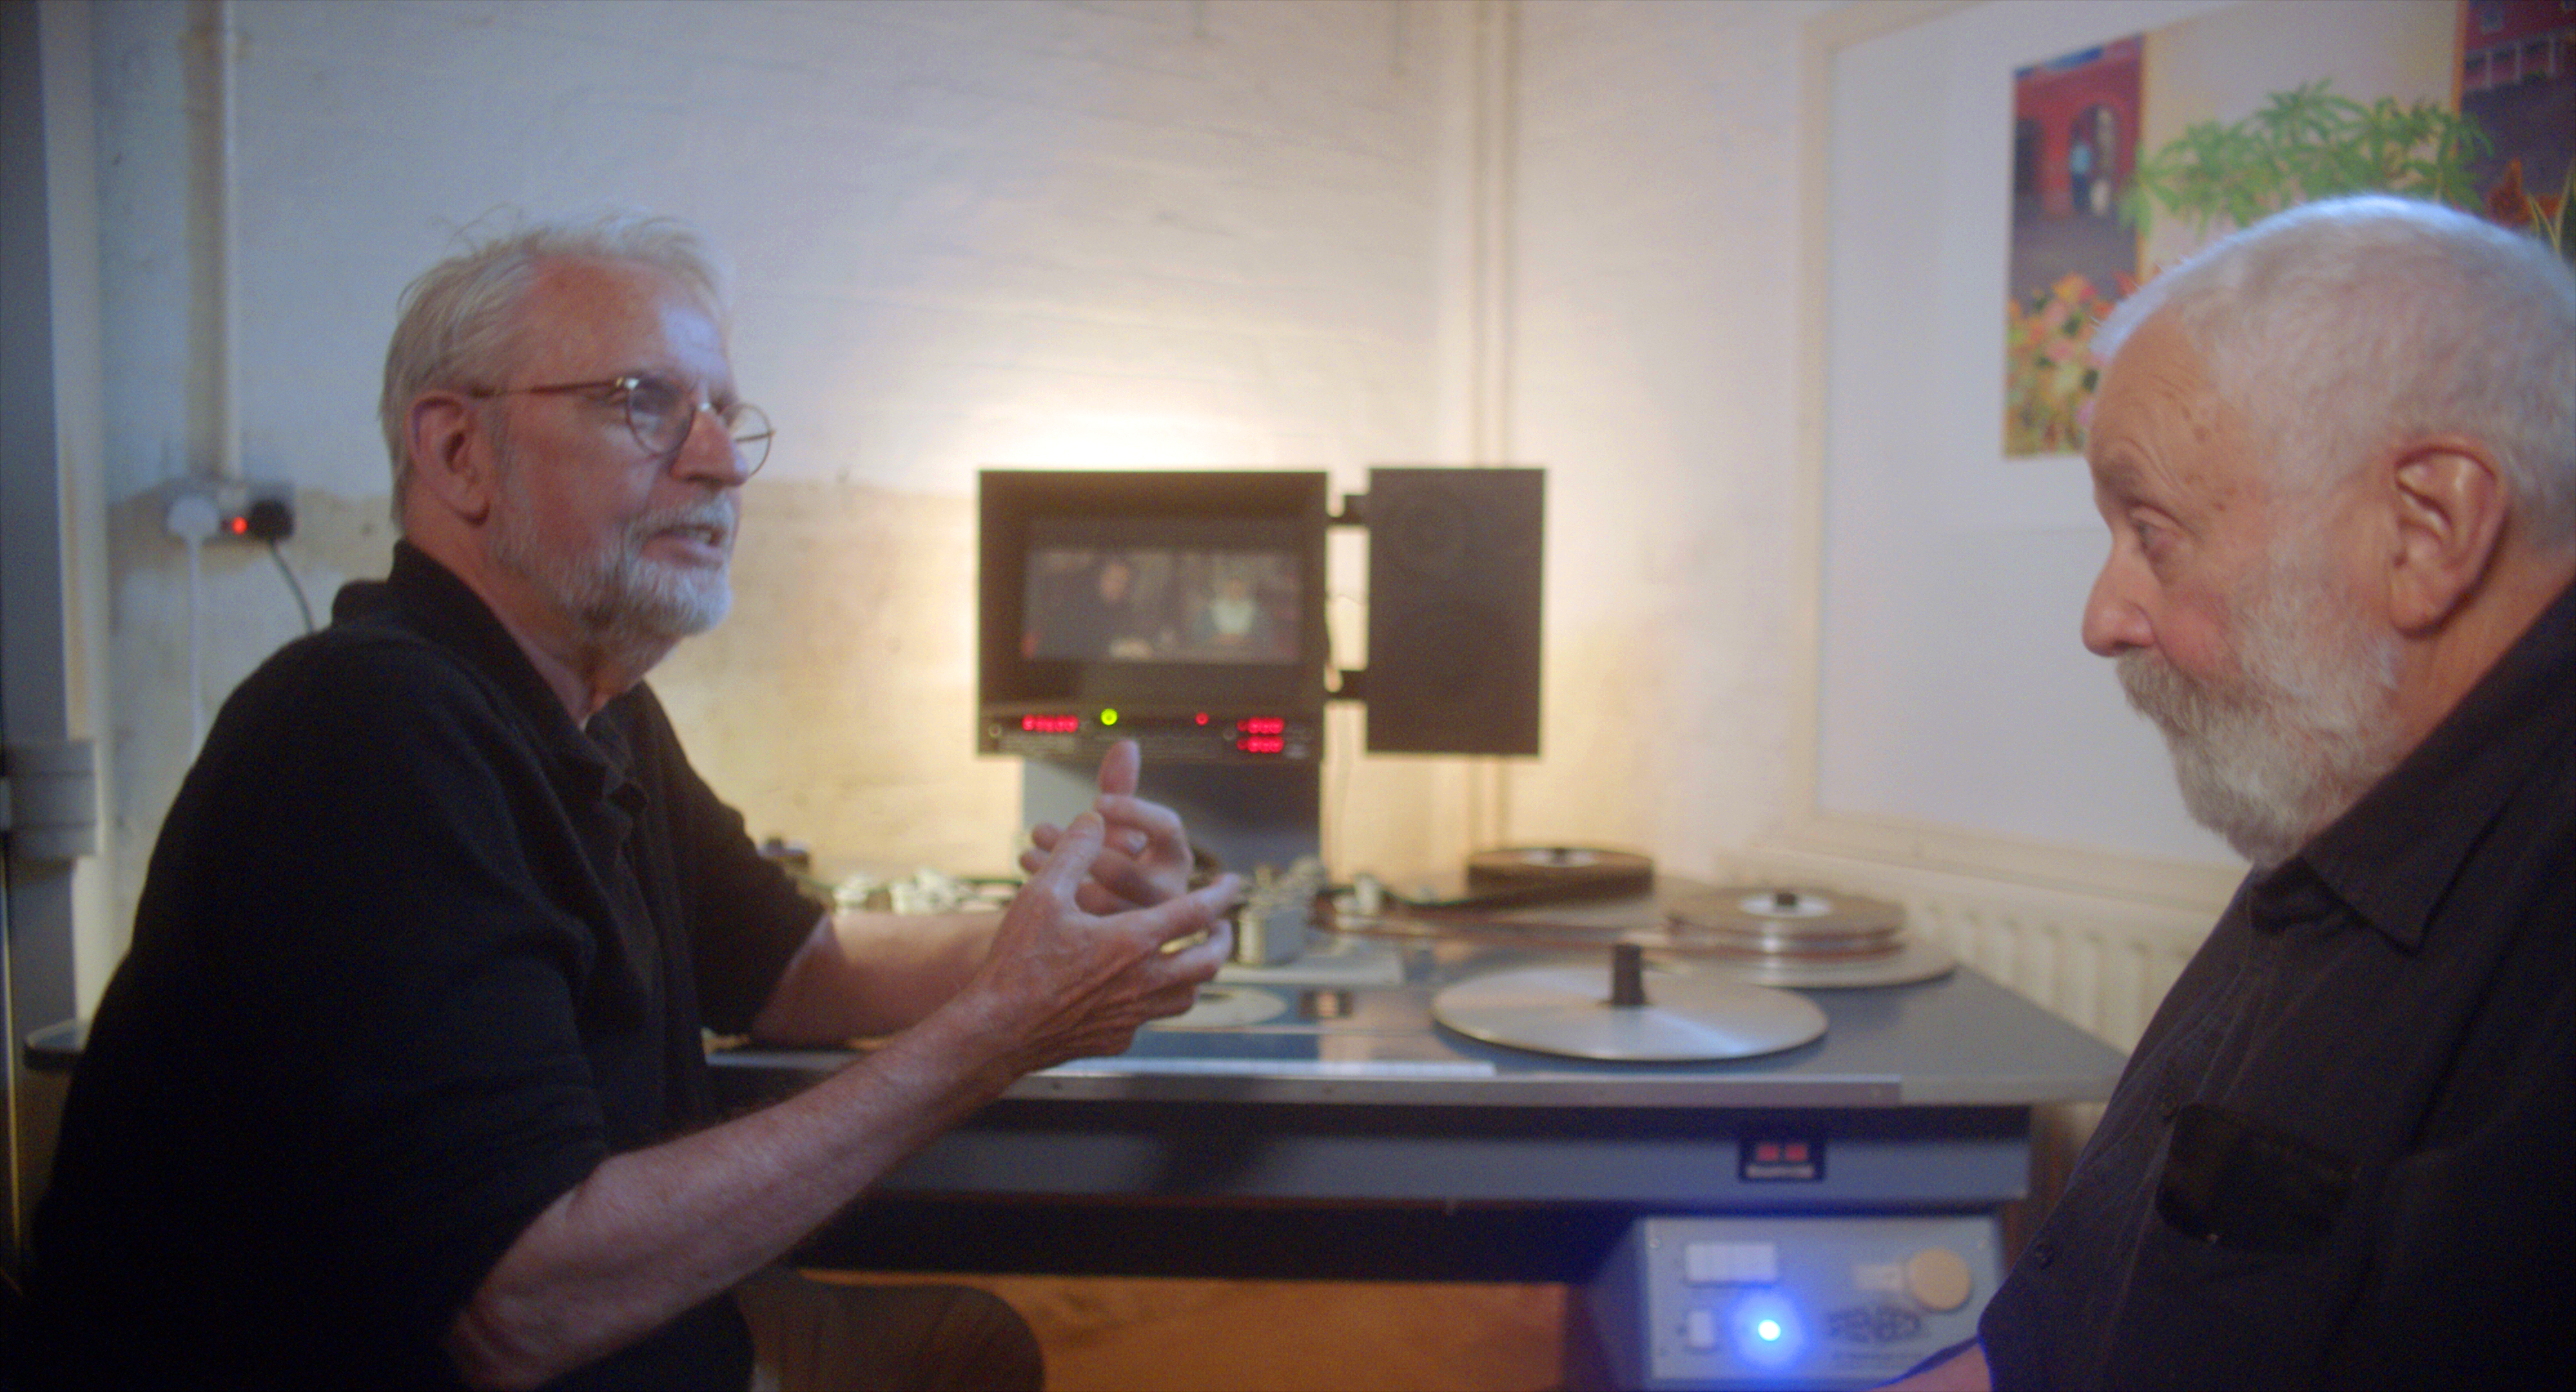 Her Name Was Moviola - An interview with Walter Murch about film editing with the Moviola 8